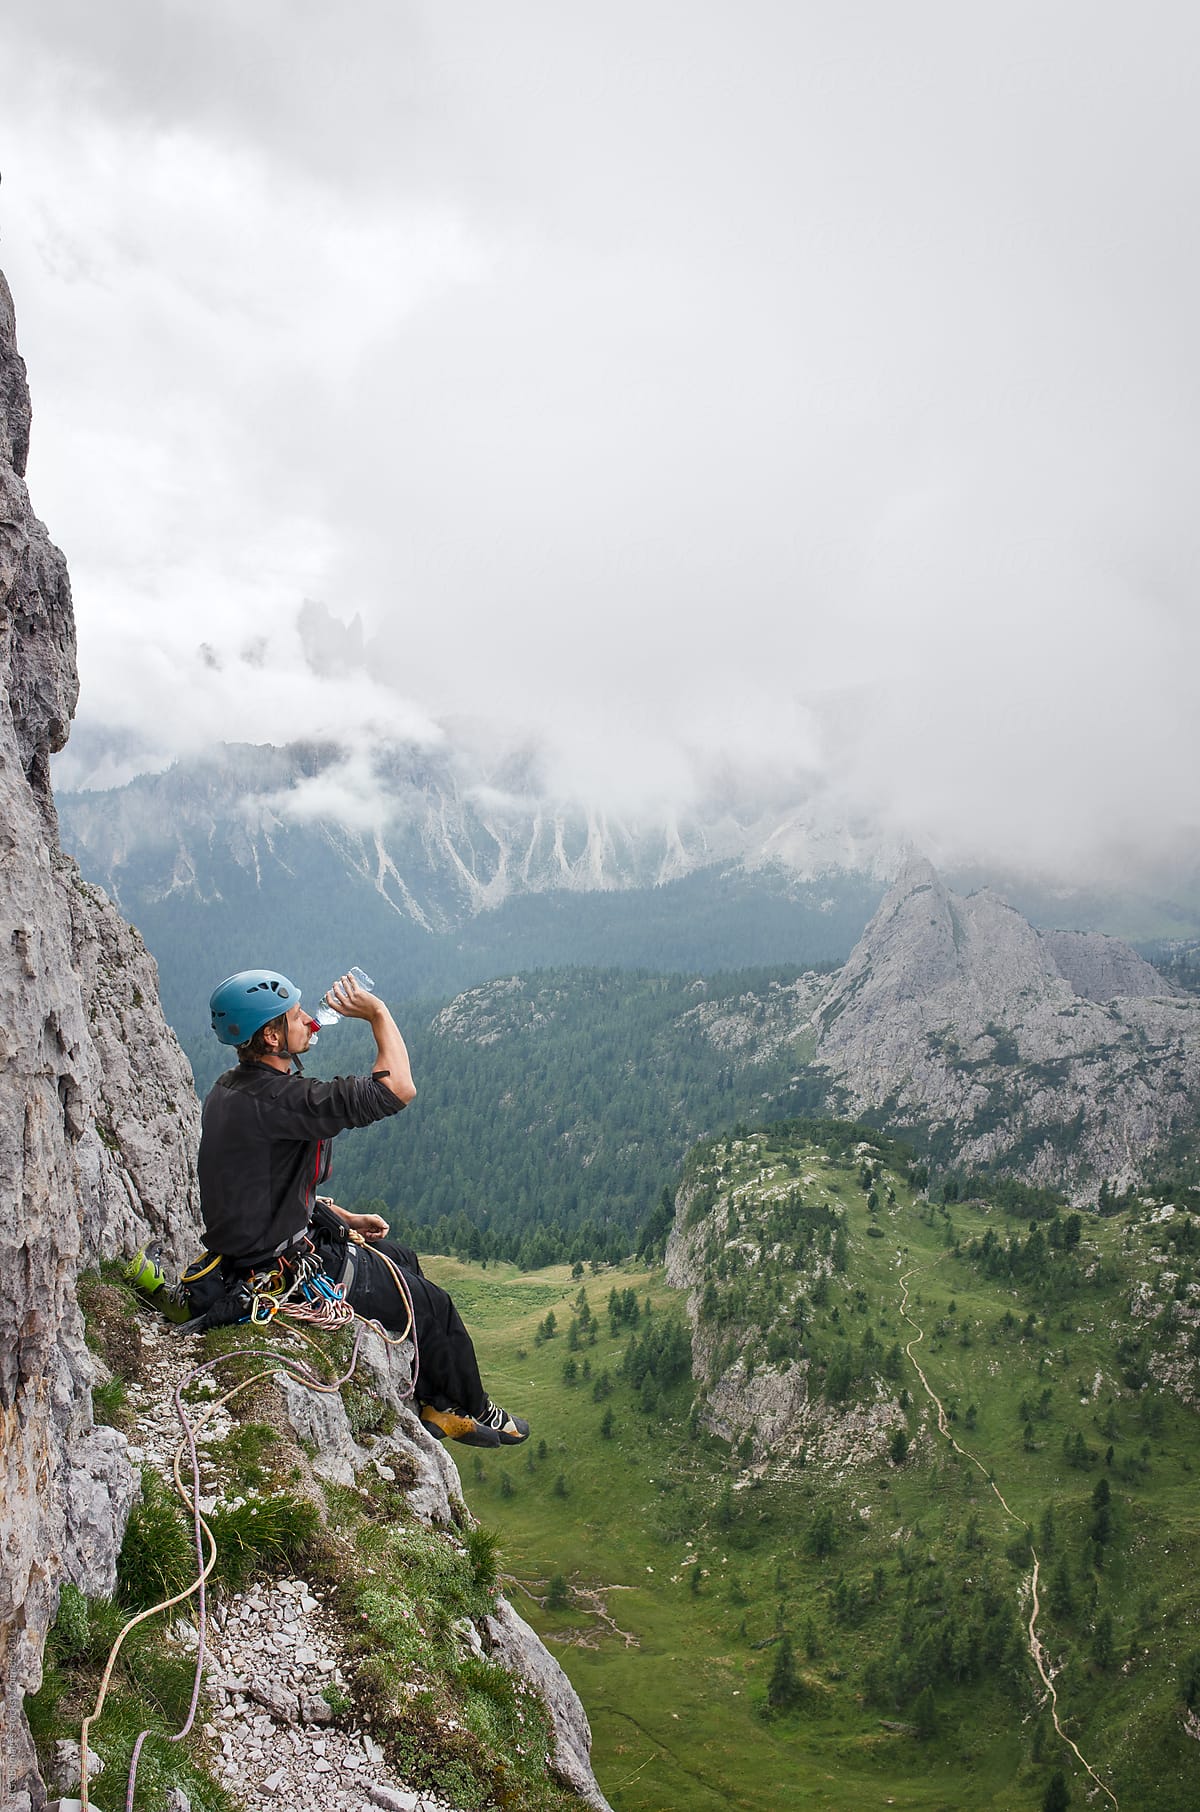 Alpinist resting on a rock ledge high above the ground